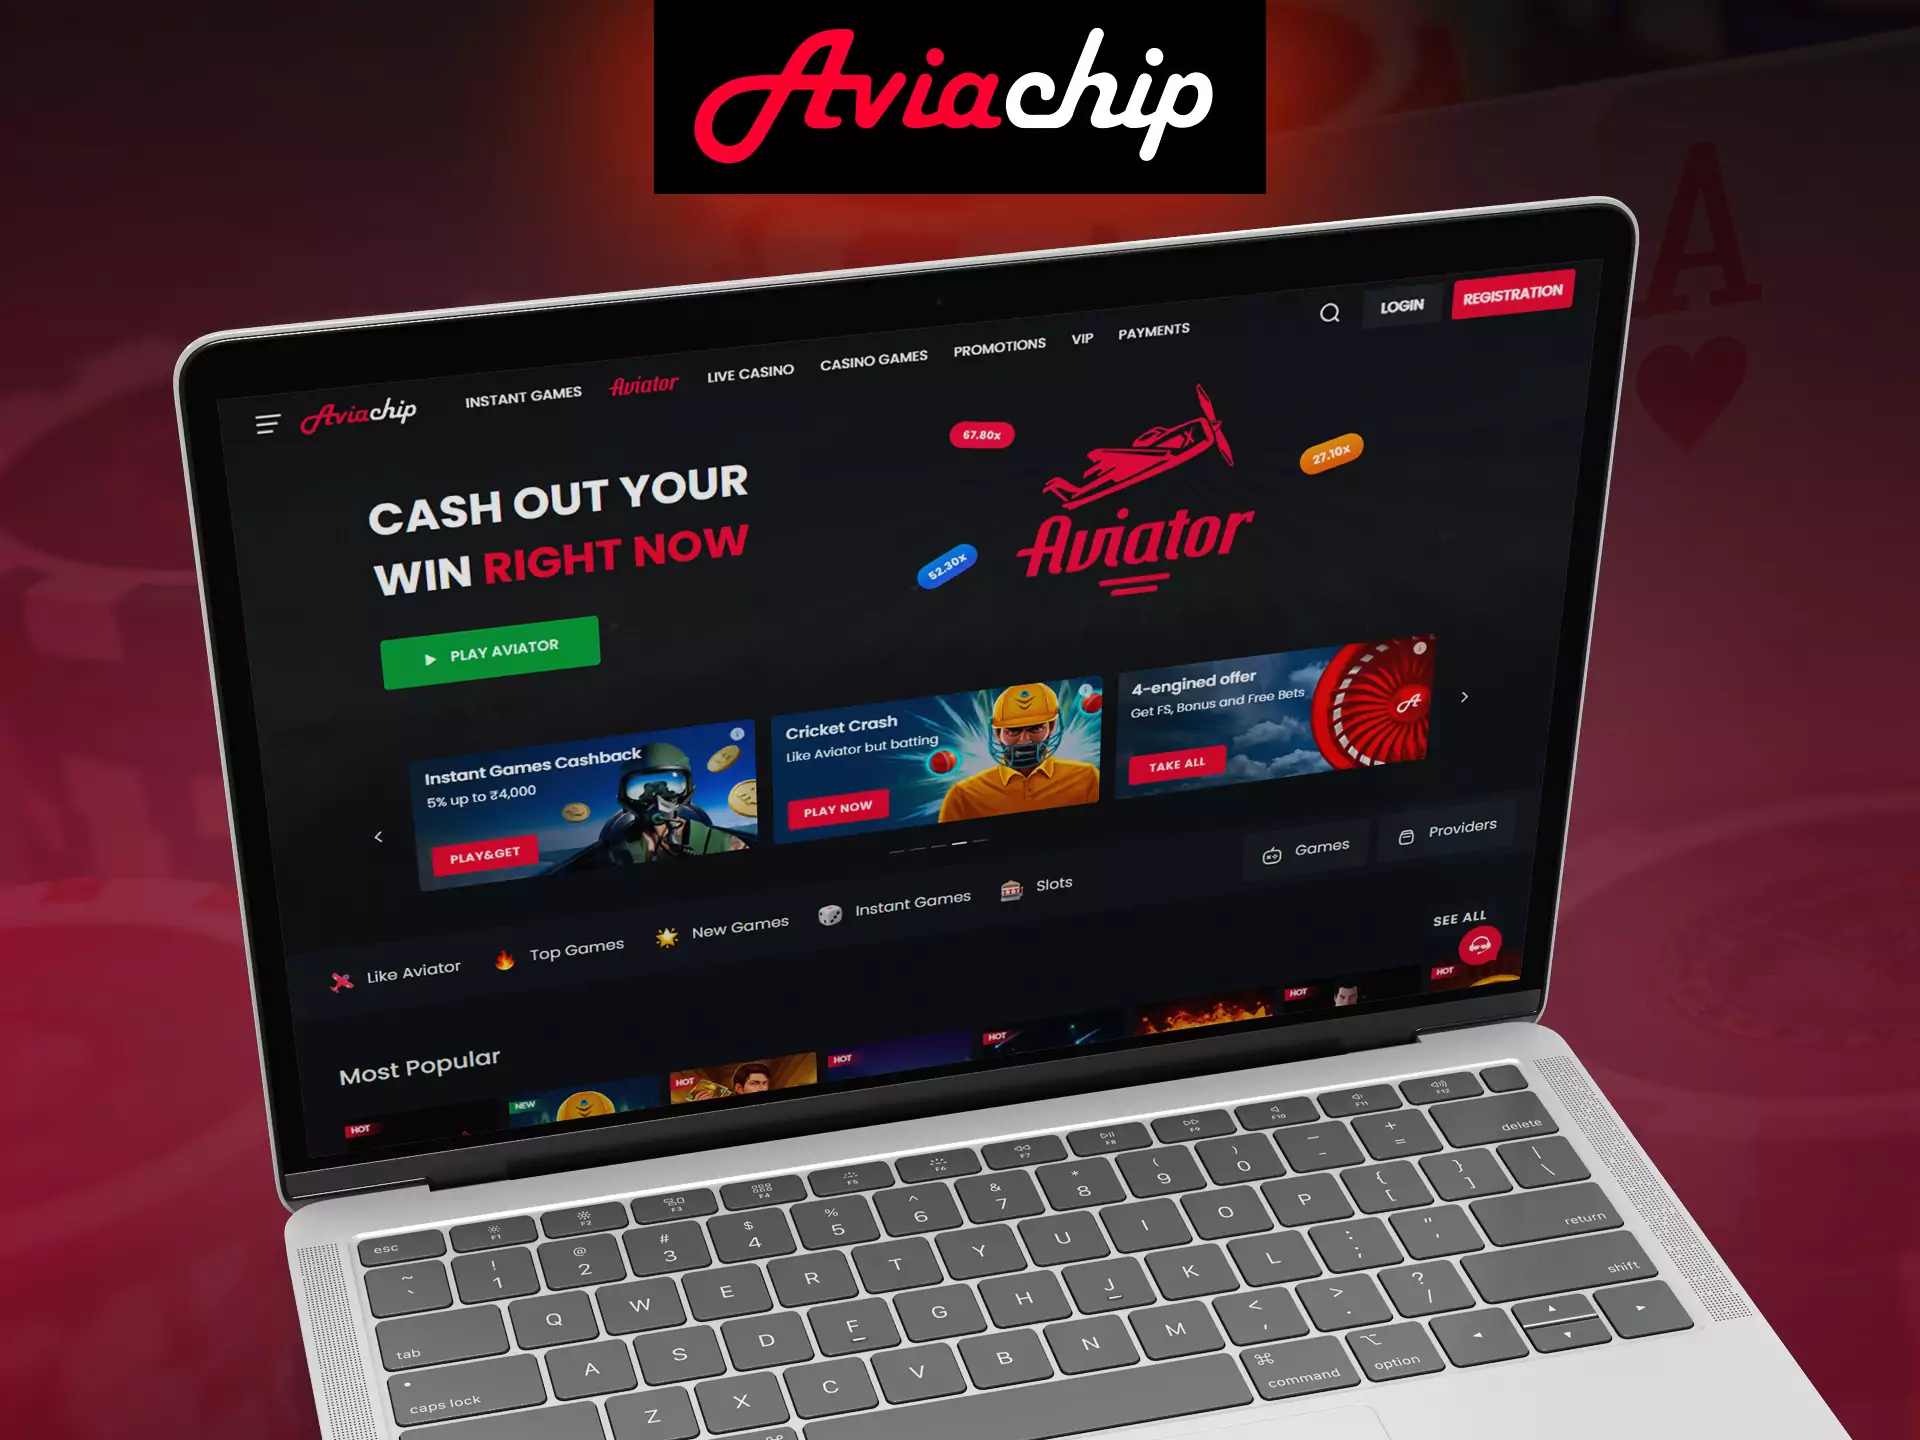 Visit the official Aviachip website, it's very handy.